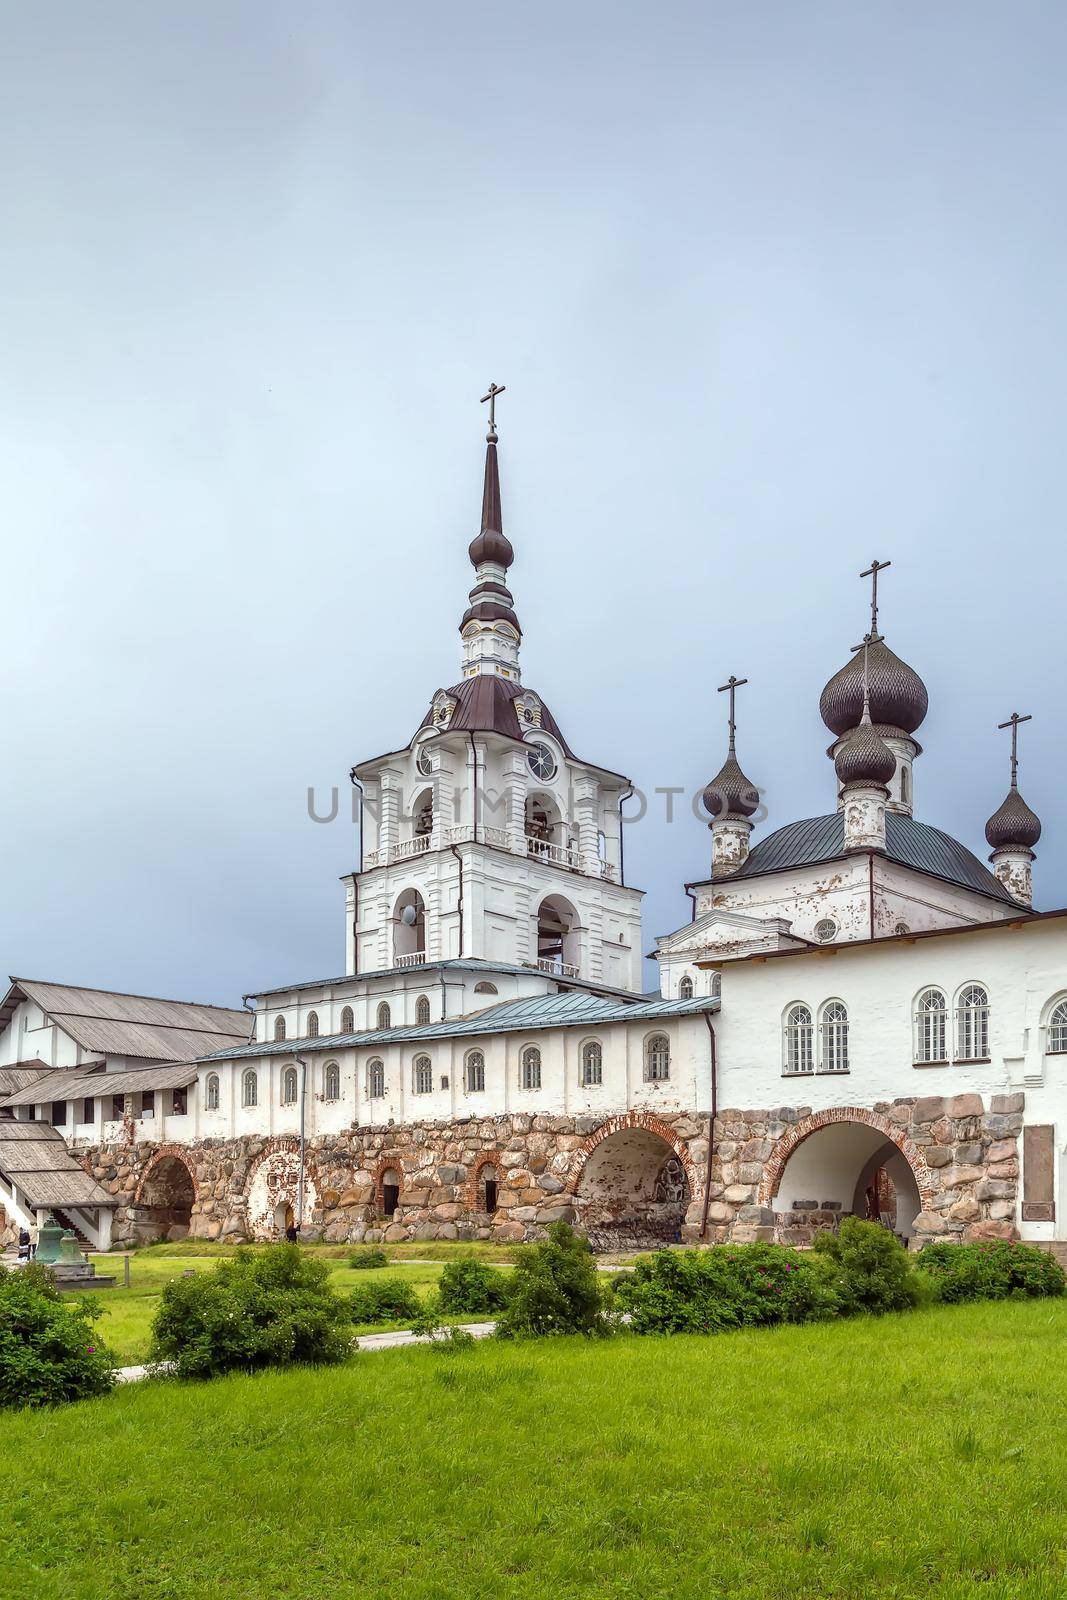 monastery located on the Solovetsky Islands in the White Sea, Russia. View of the main courtyard